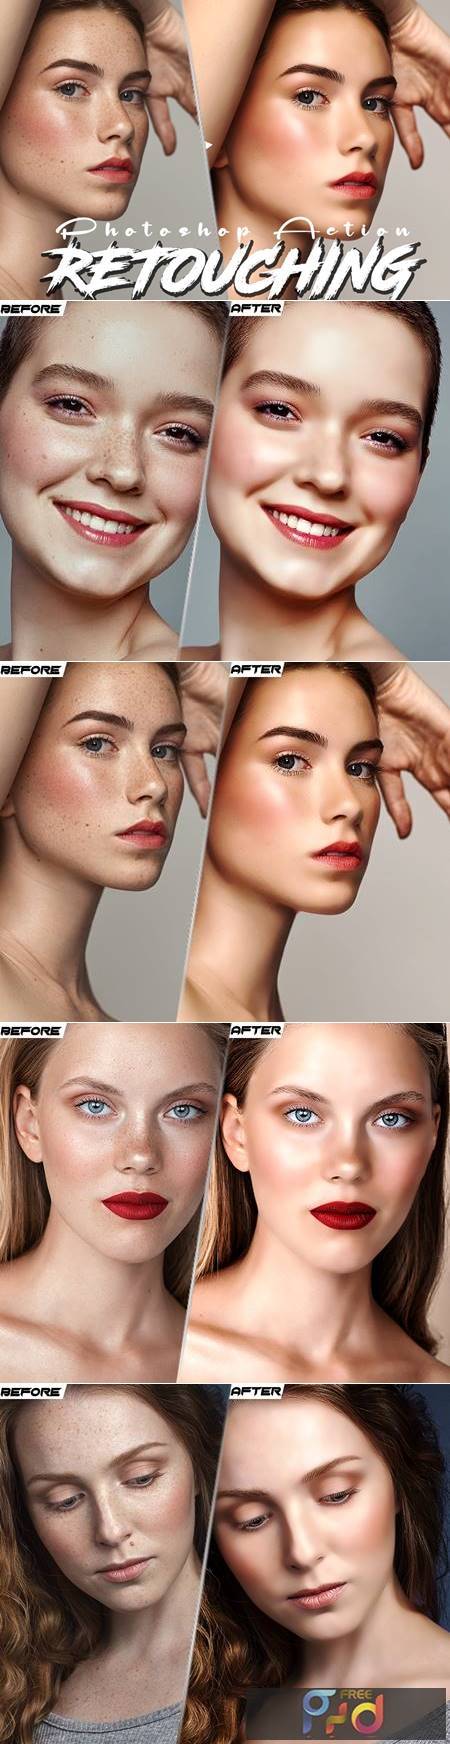 FreePsdVn.com 2105270 ACTION skin retouching photoshop action dq8up7g